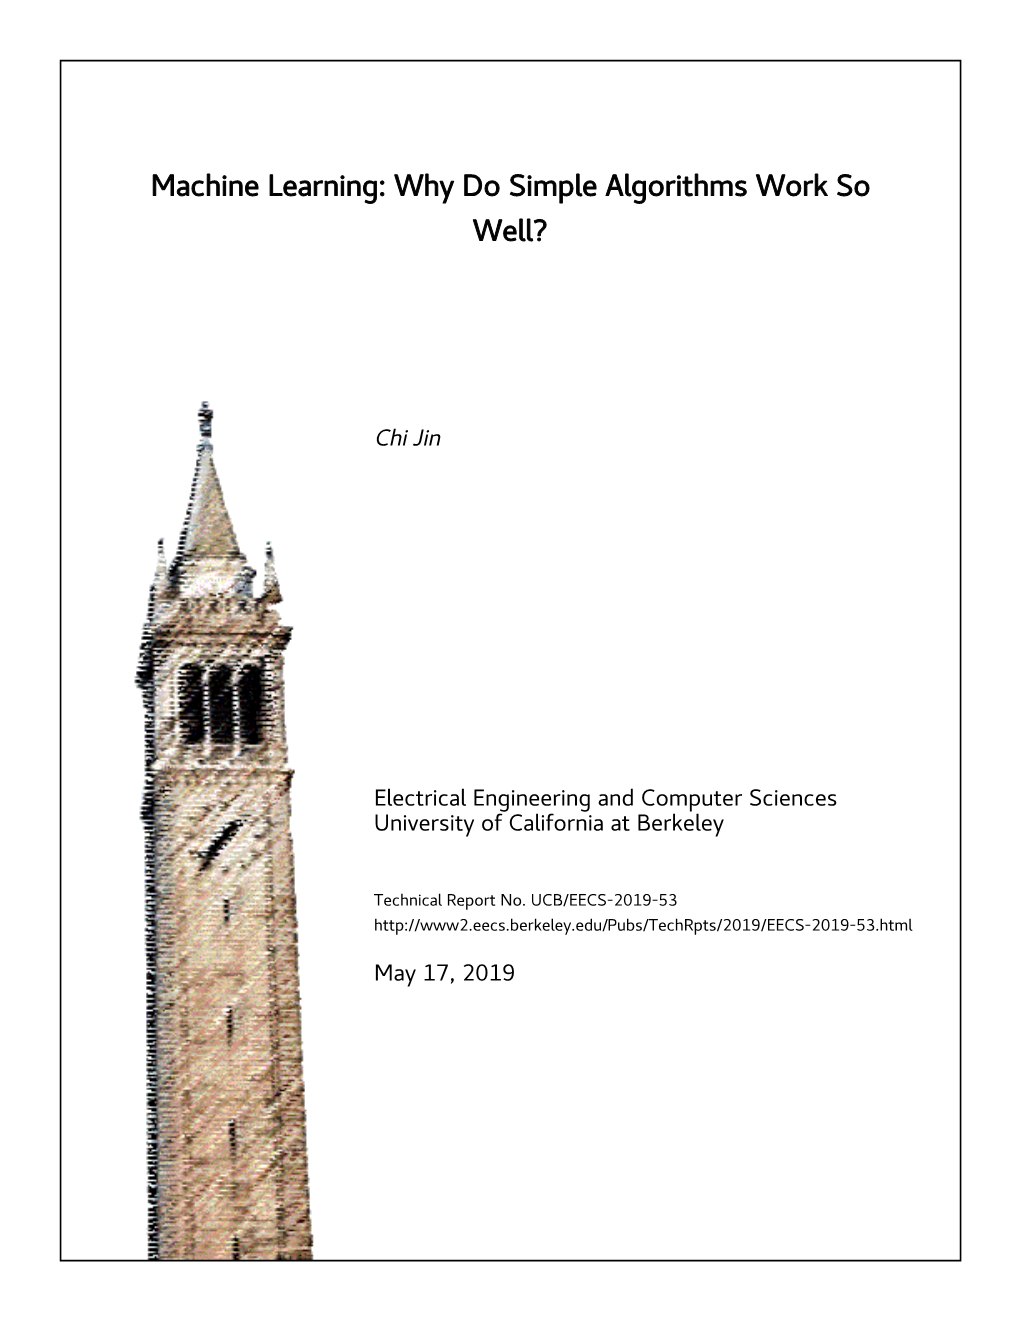 Machine Learning: Why Do Simple Algorithms Work So Well?